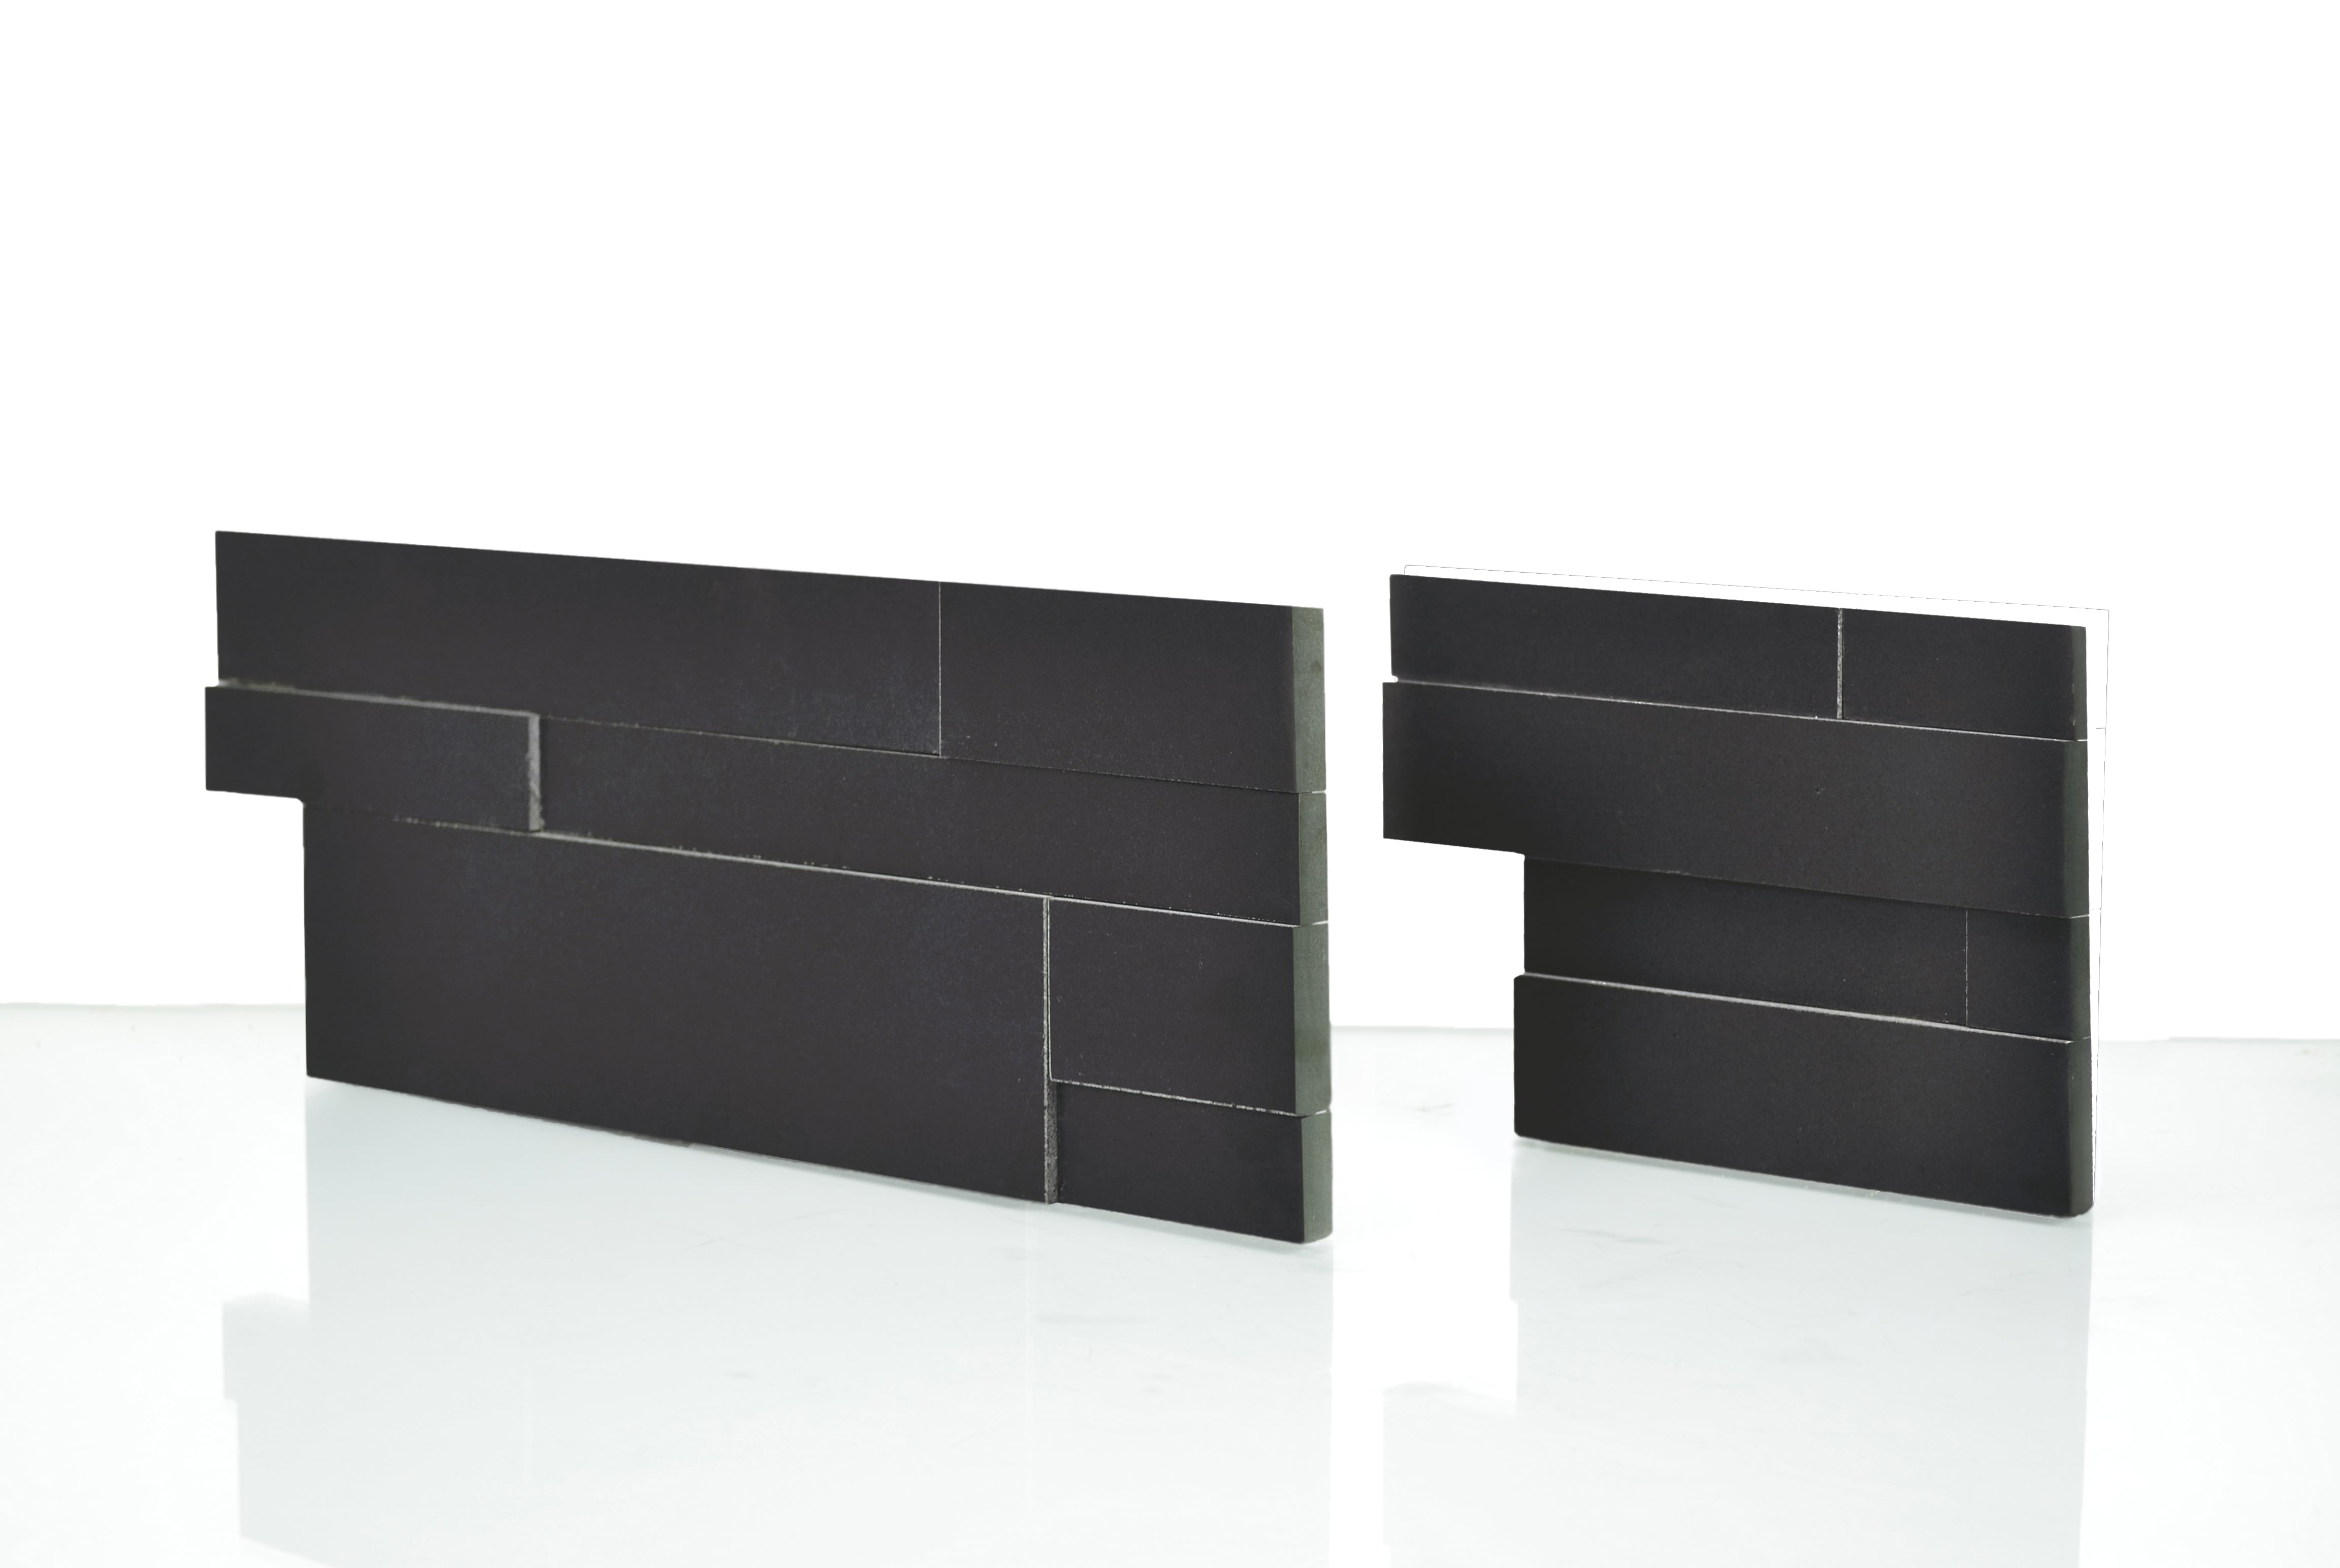 Studio Shot of a Natural End Panel of the Norstone Aksent 3D Series Stone Veneer Panel in Ebony Basalt